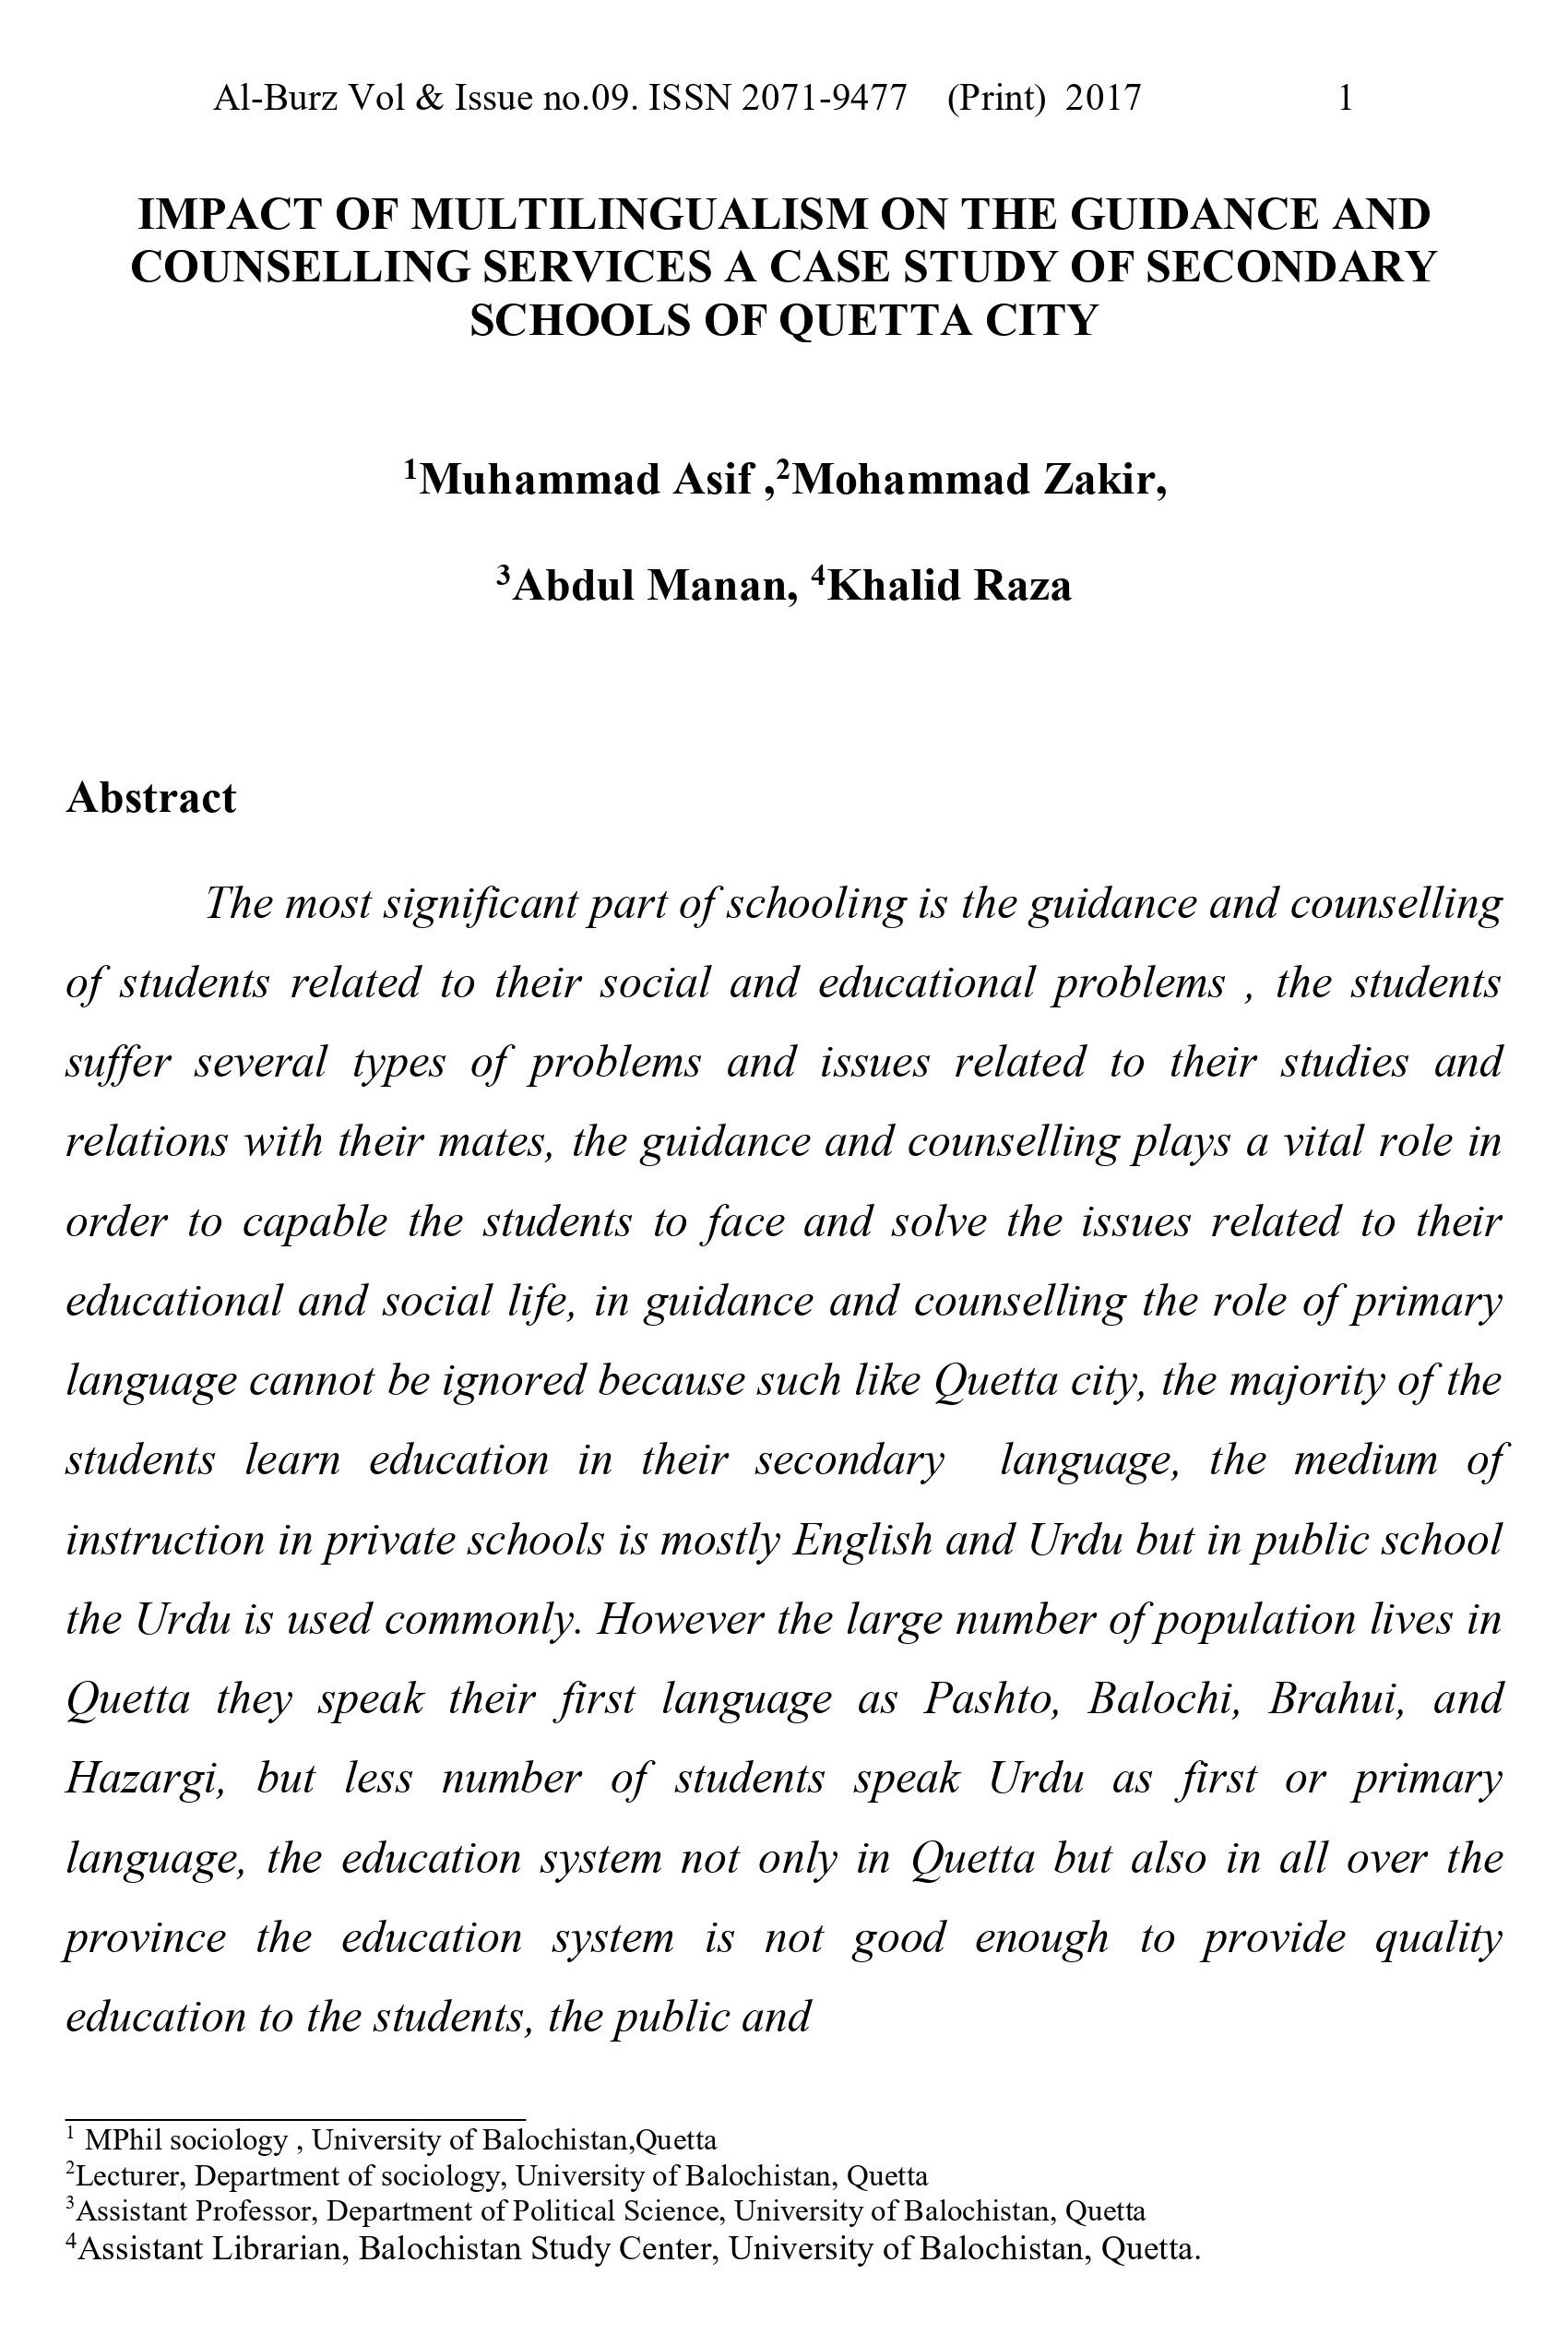 IMPACT OF MULTILINGUALISM ON THE GUIDANCE AND COUNSELLING SERVICES A CASE STUDY OF SECONDARY SCHOOLS OF QUETTA CITY